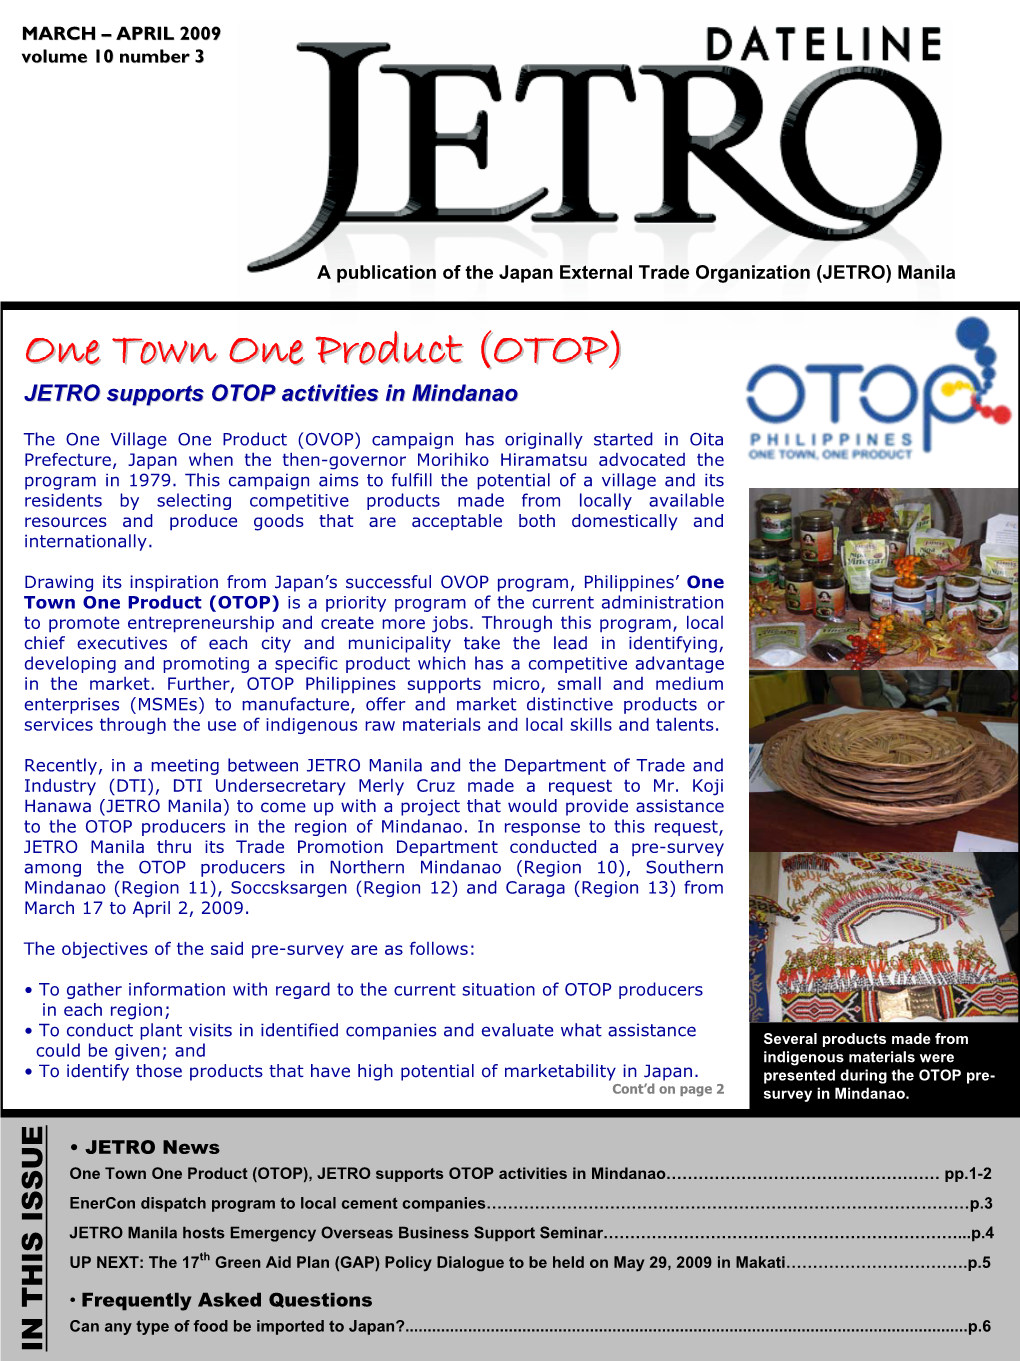 One Town One Product (OTOP) JETRO Supports OTOP Activities in Mindanao